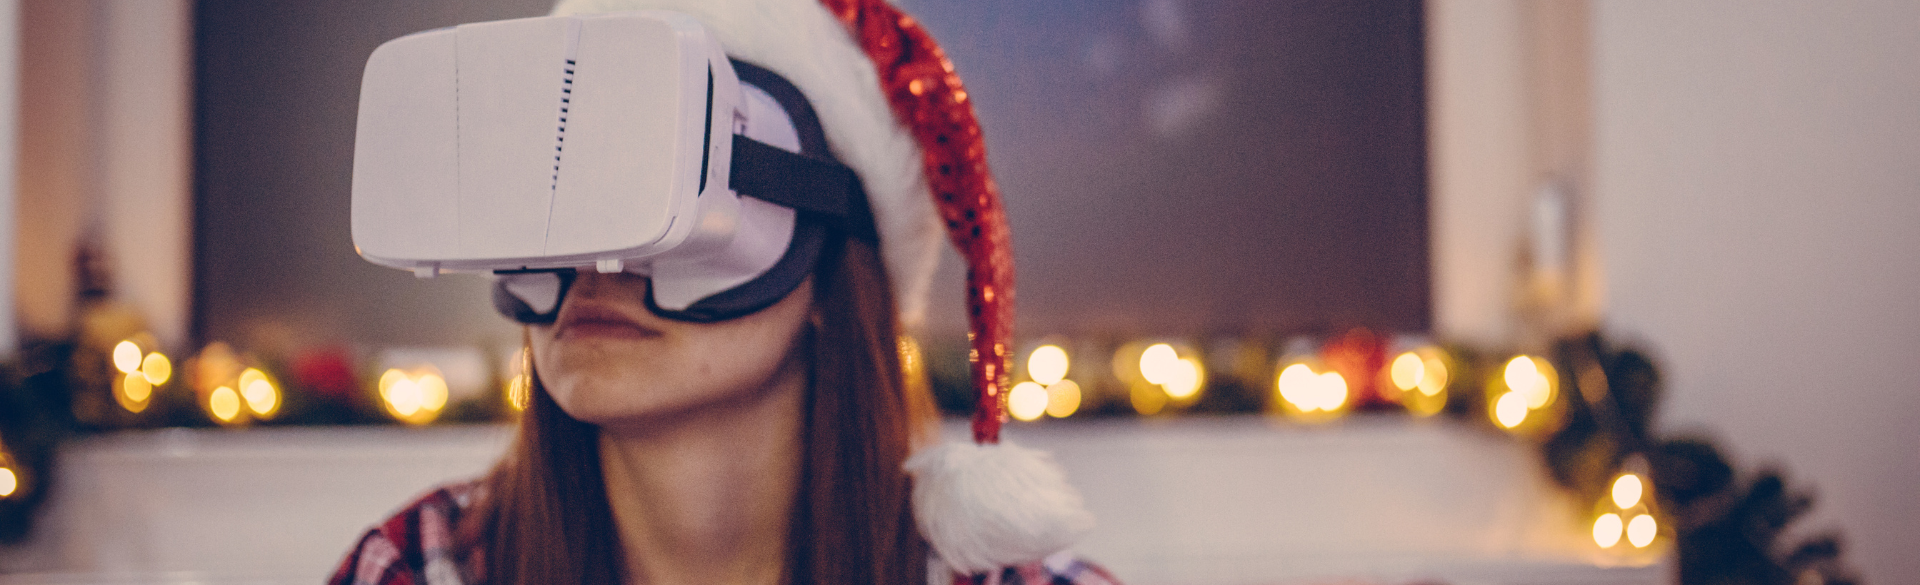 Maintaining Healthy Eyes Throughout the Holidays